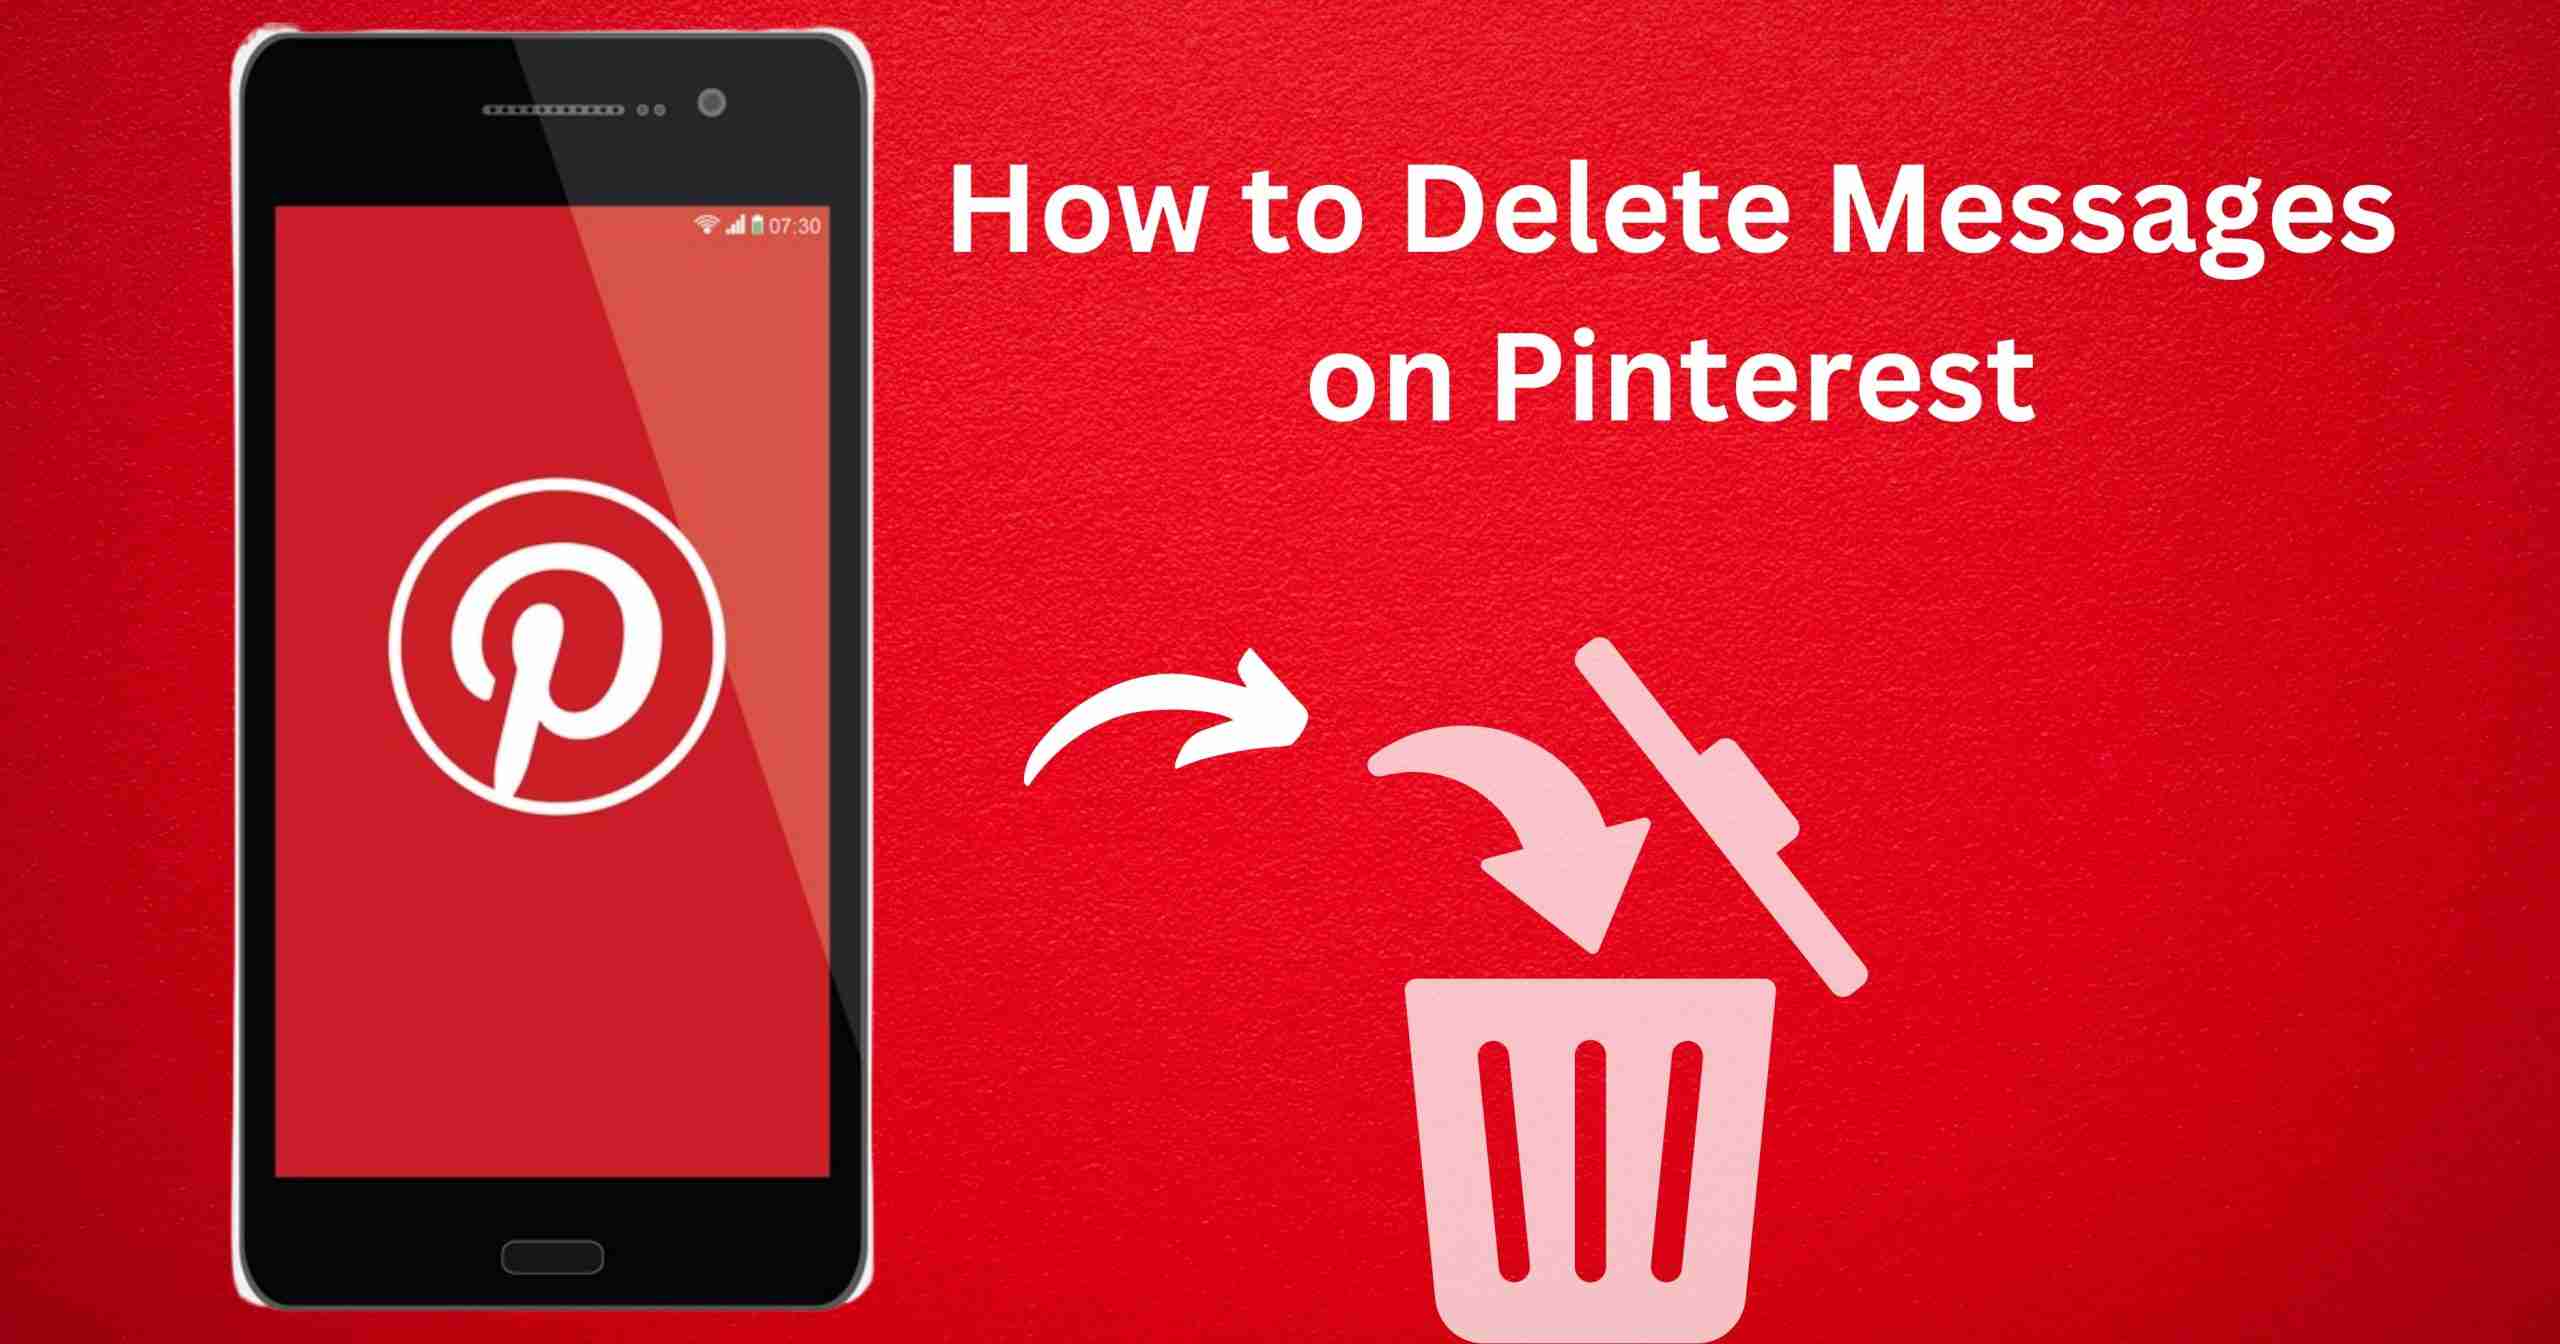 Can you recover a deleted Pinterest message?